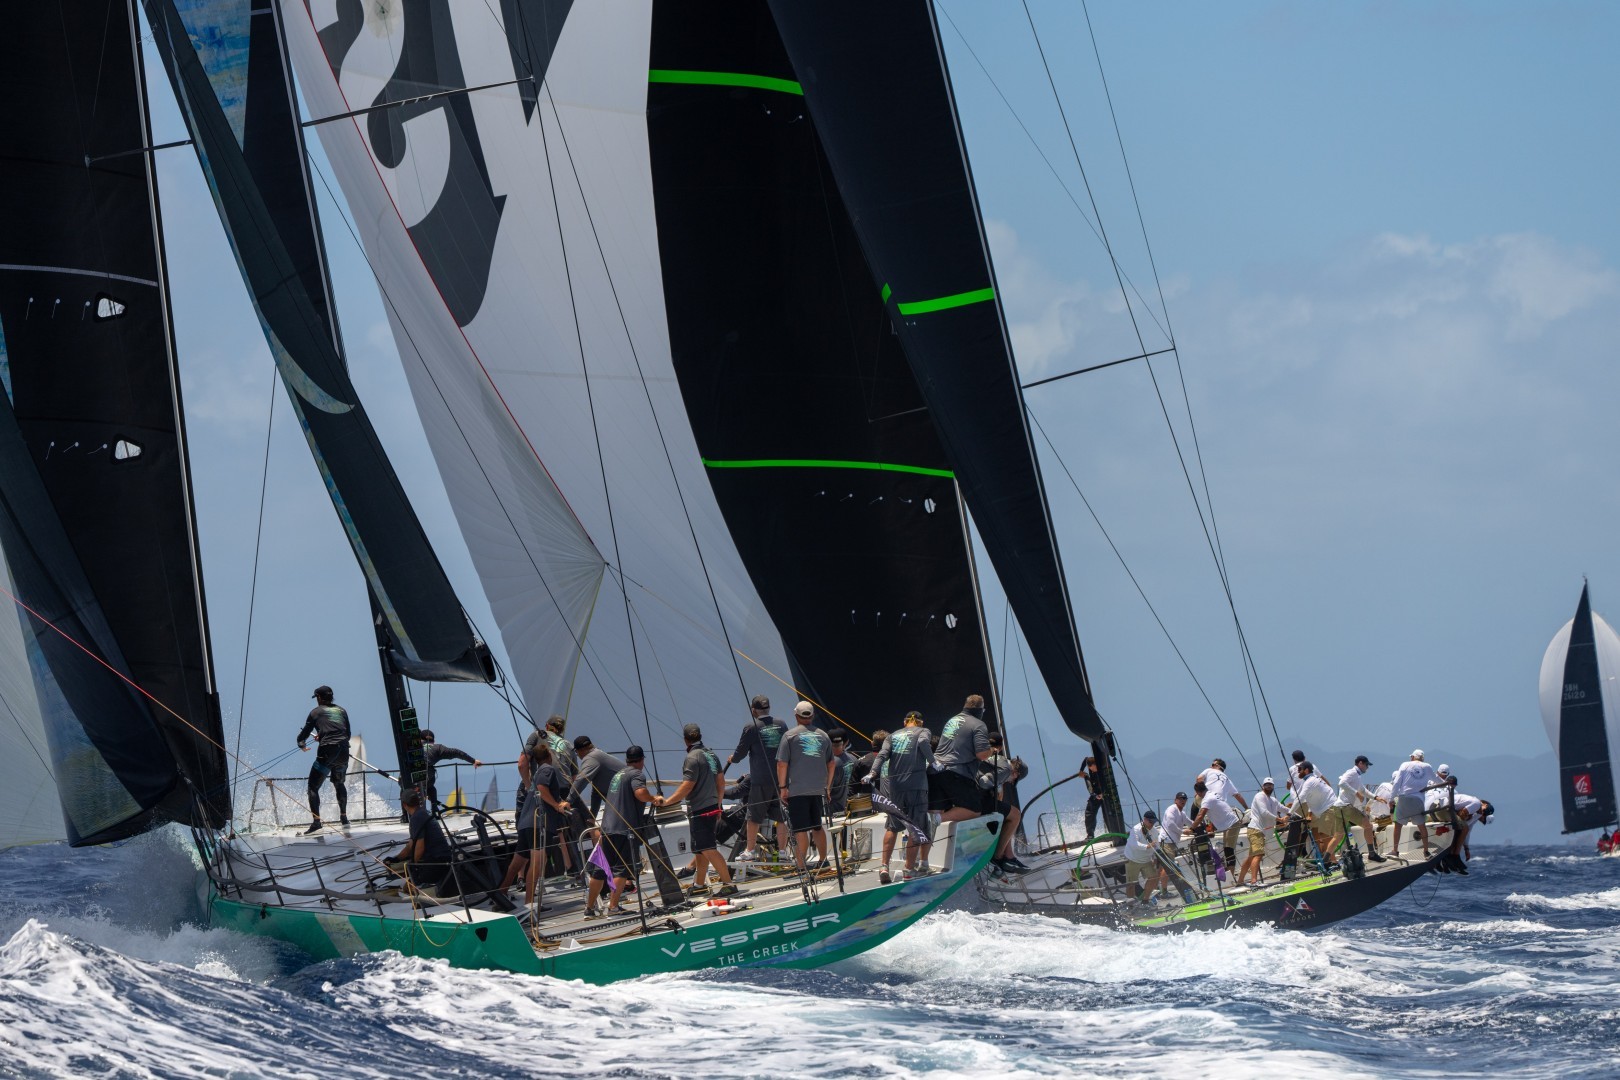 Close fight between Jim Swartz's Vesper and Hap Fauth's newly lengthed Bella Mente. Photo: Christophe Jouany.